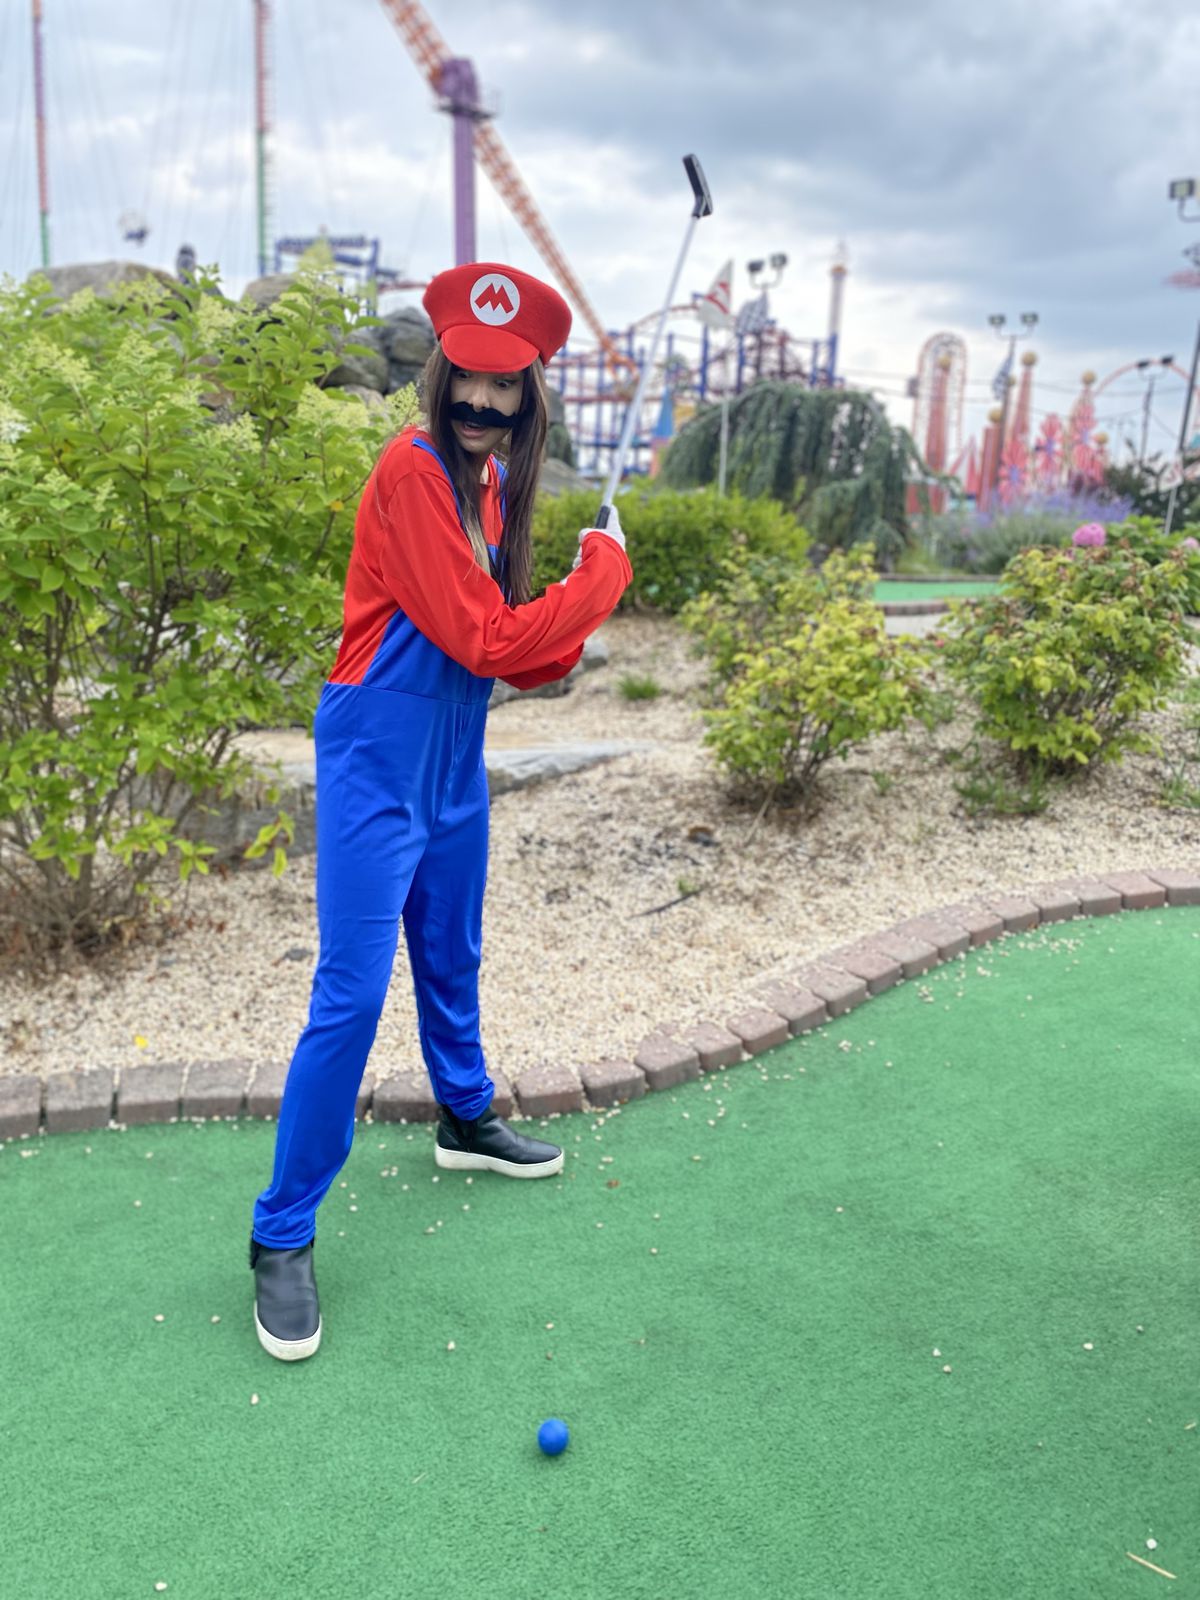 XTina GG takes a swing at a mini golf course while dressed as Mario